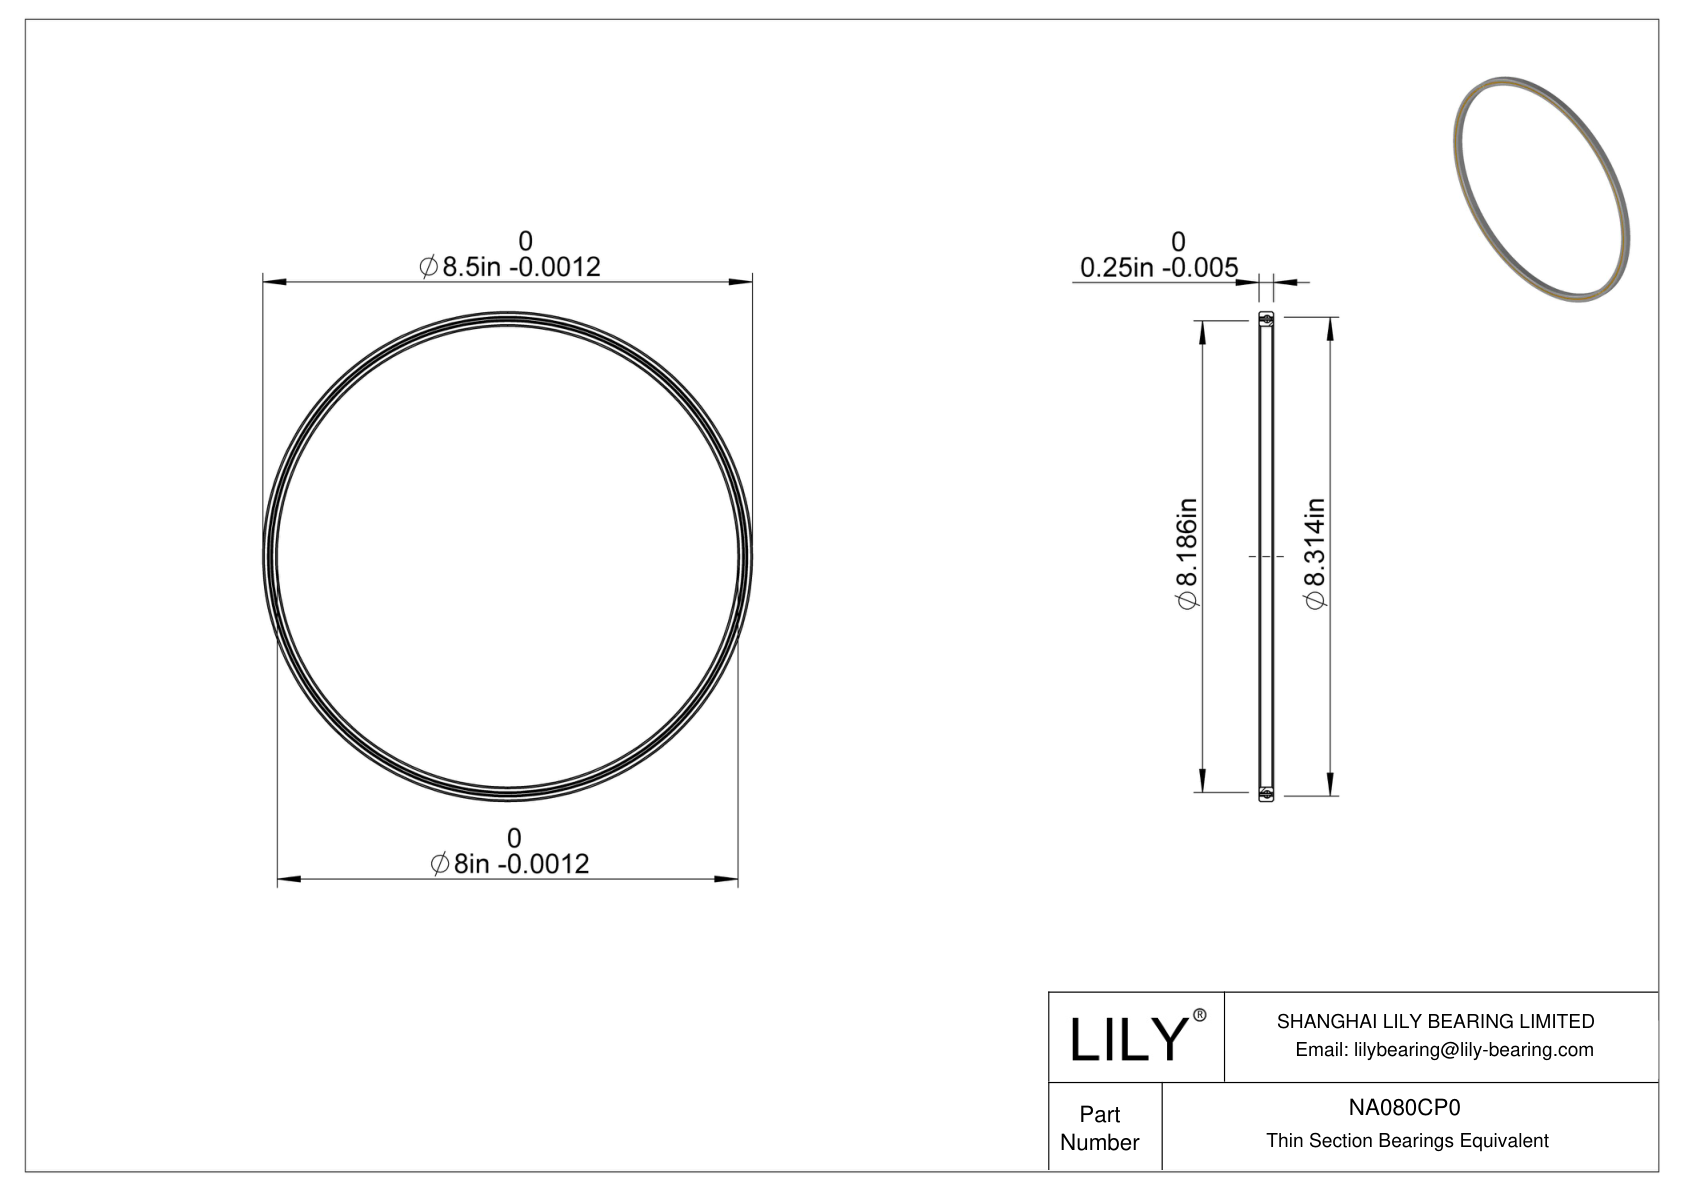 NA080CP0 Constant Section (CS) Bearings cad drawing